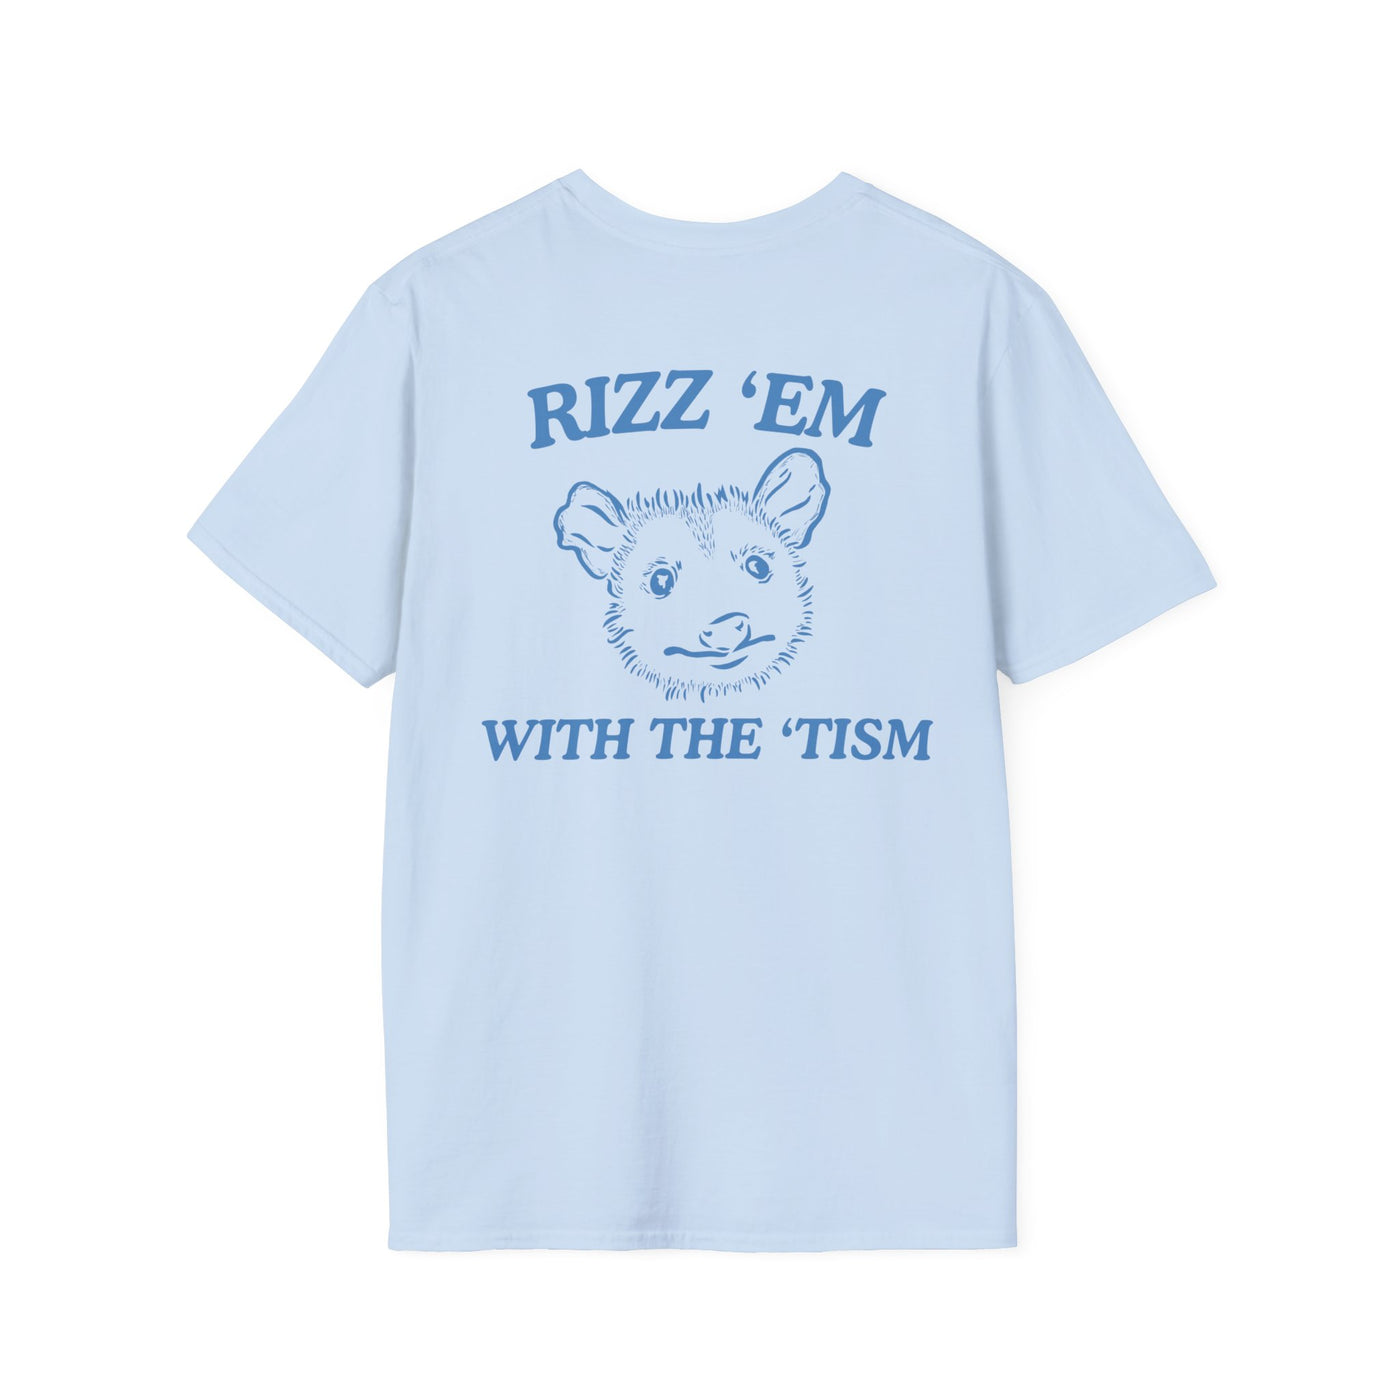 Rizz 'Em With The 'Tism (BACK DESIGN ONLY)